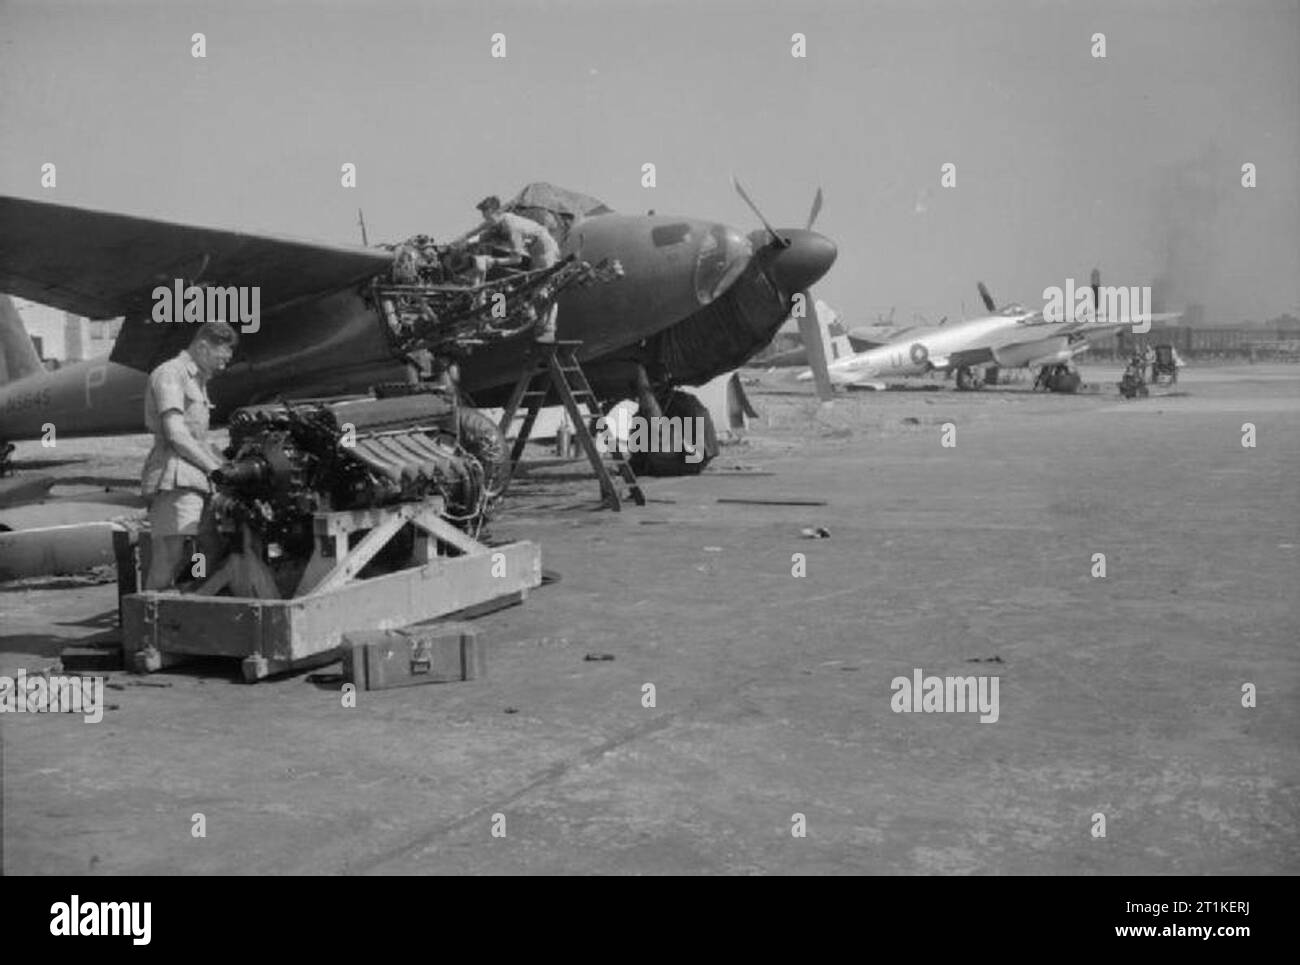 Royal Air Force Operations in the Far East, 1941-1945. Fitters of No. 684 Squadron RAF prepare to install a new Rolls Royce Merlin 76-series engine in De Havilland Mosquito PR Mark XVI, NS645 'P', at Alipore, India. NS645 is finished in overall 'PR blue' paint scheme, while in the background another aircraft of the Squadron, MM367 'M', has a silver dope finish with local theatre recognition markings. Stock Photo